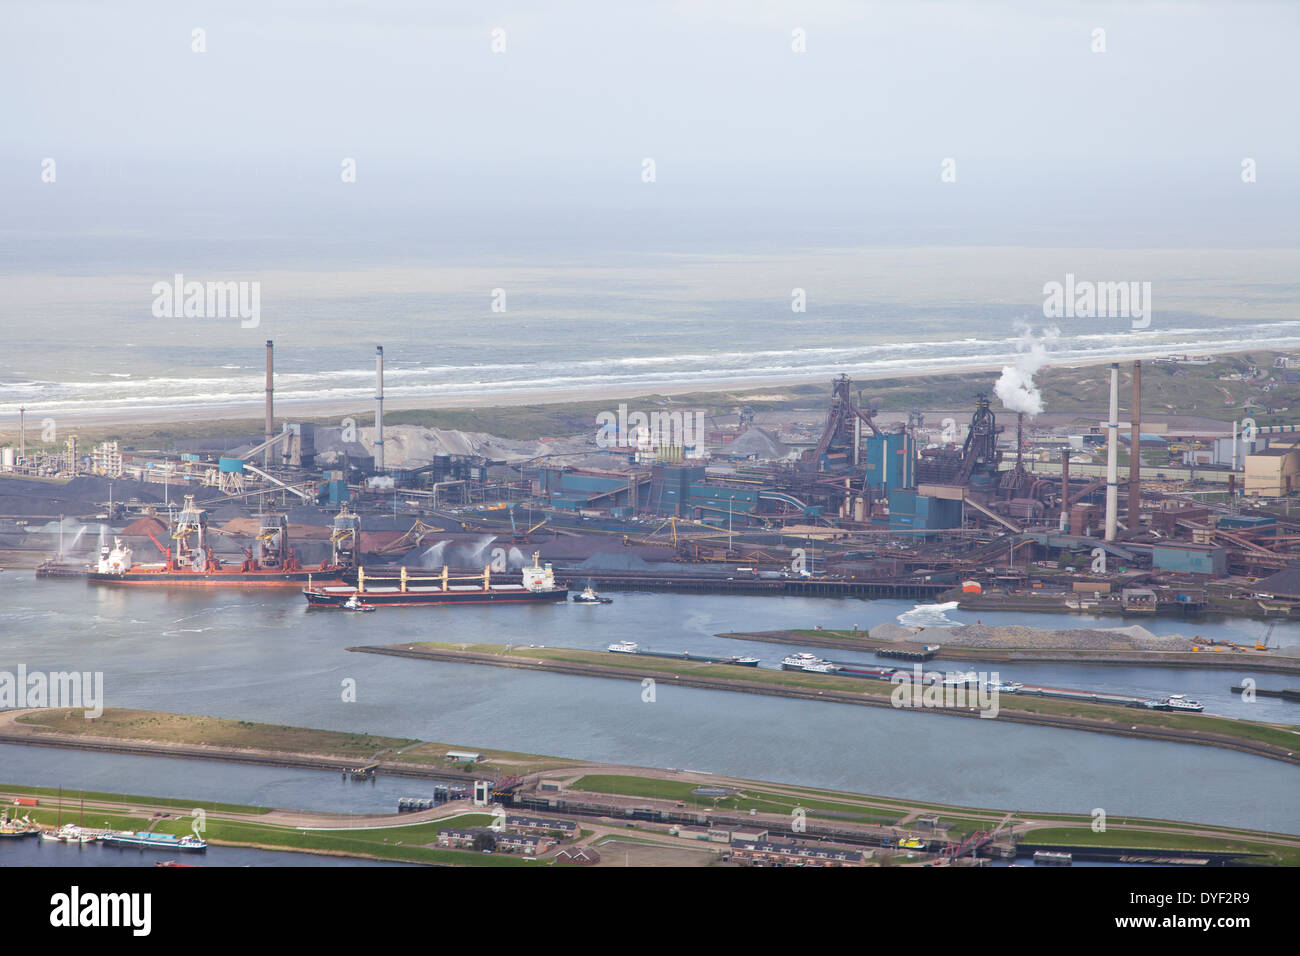 Steel industry at Velsen, The Netherlands from above Stock Photo